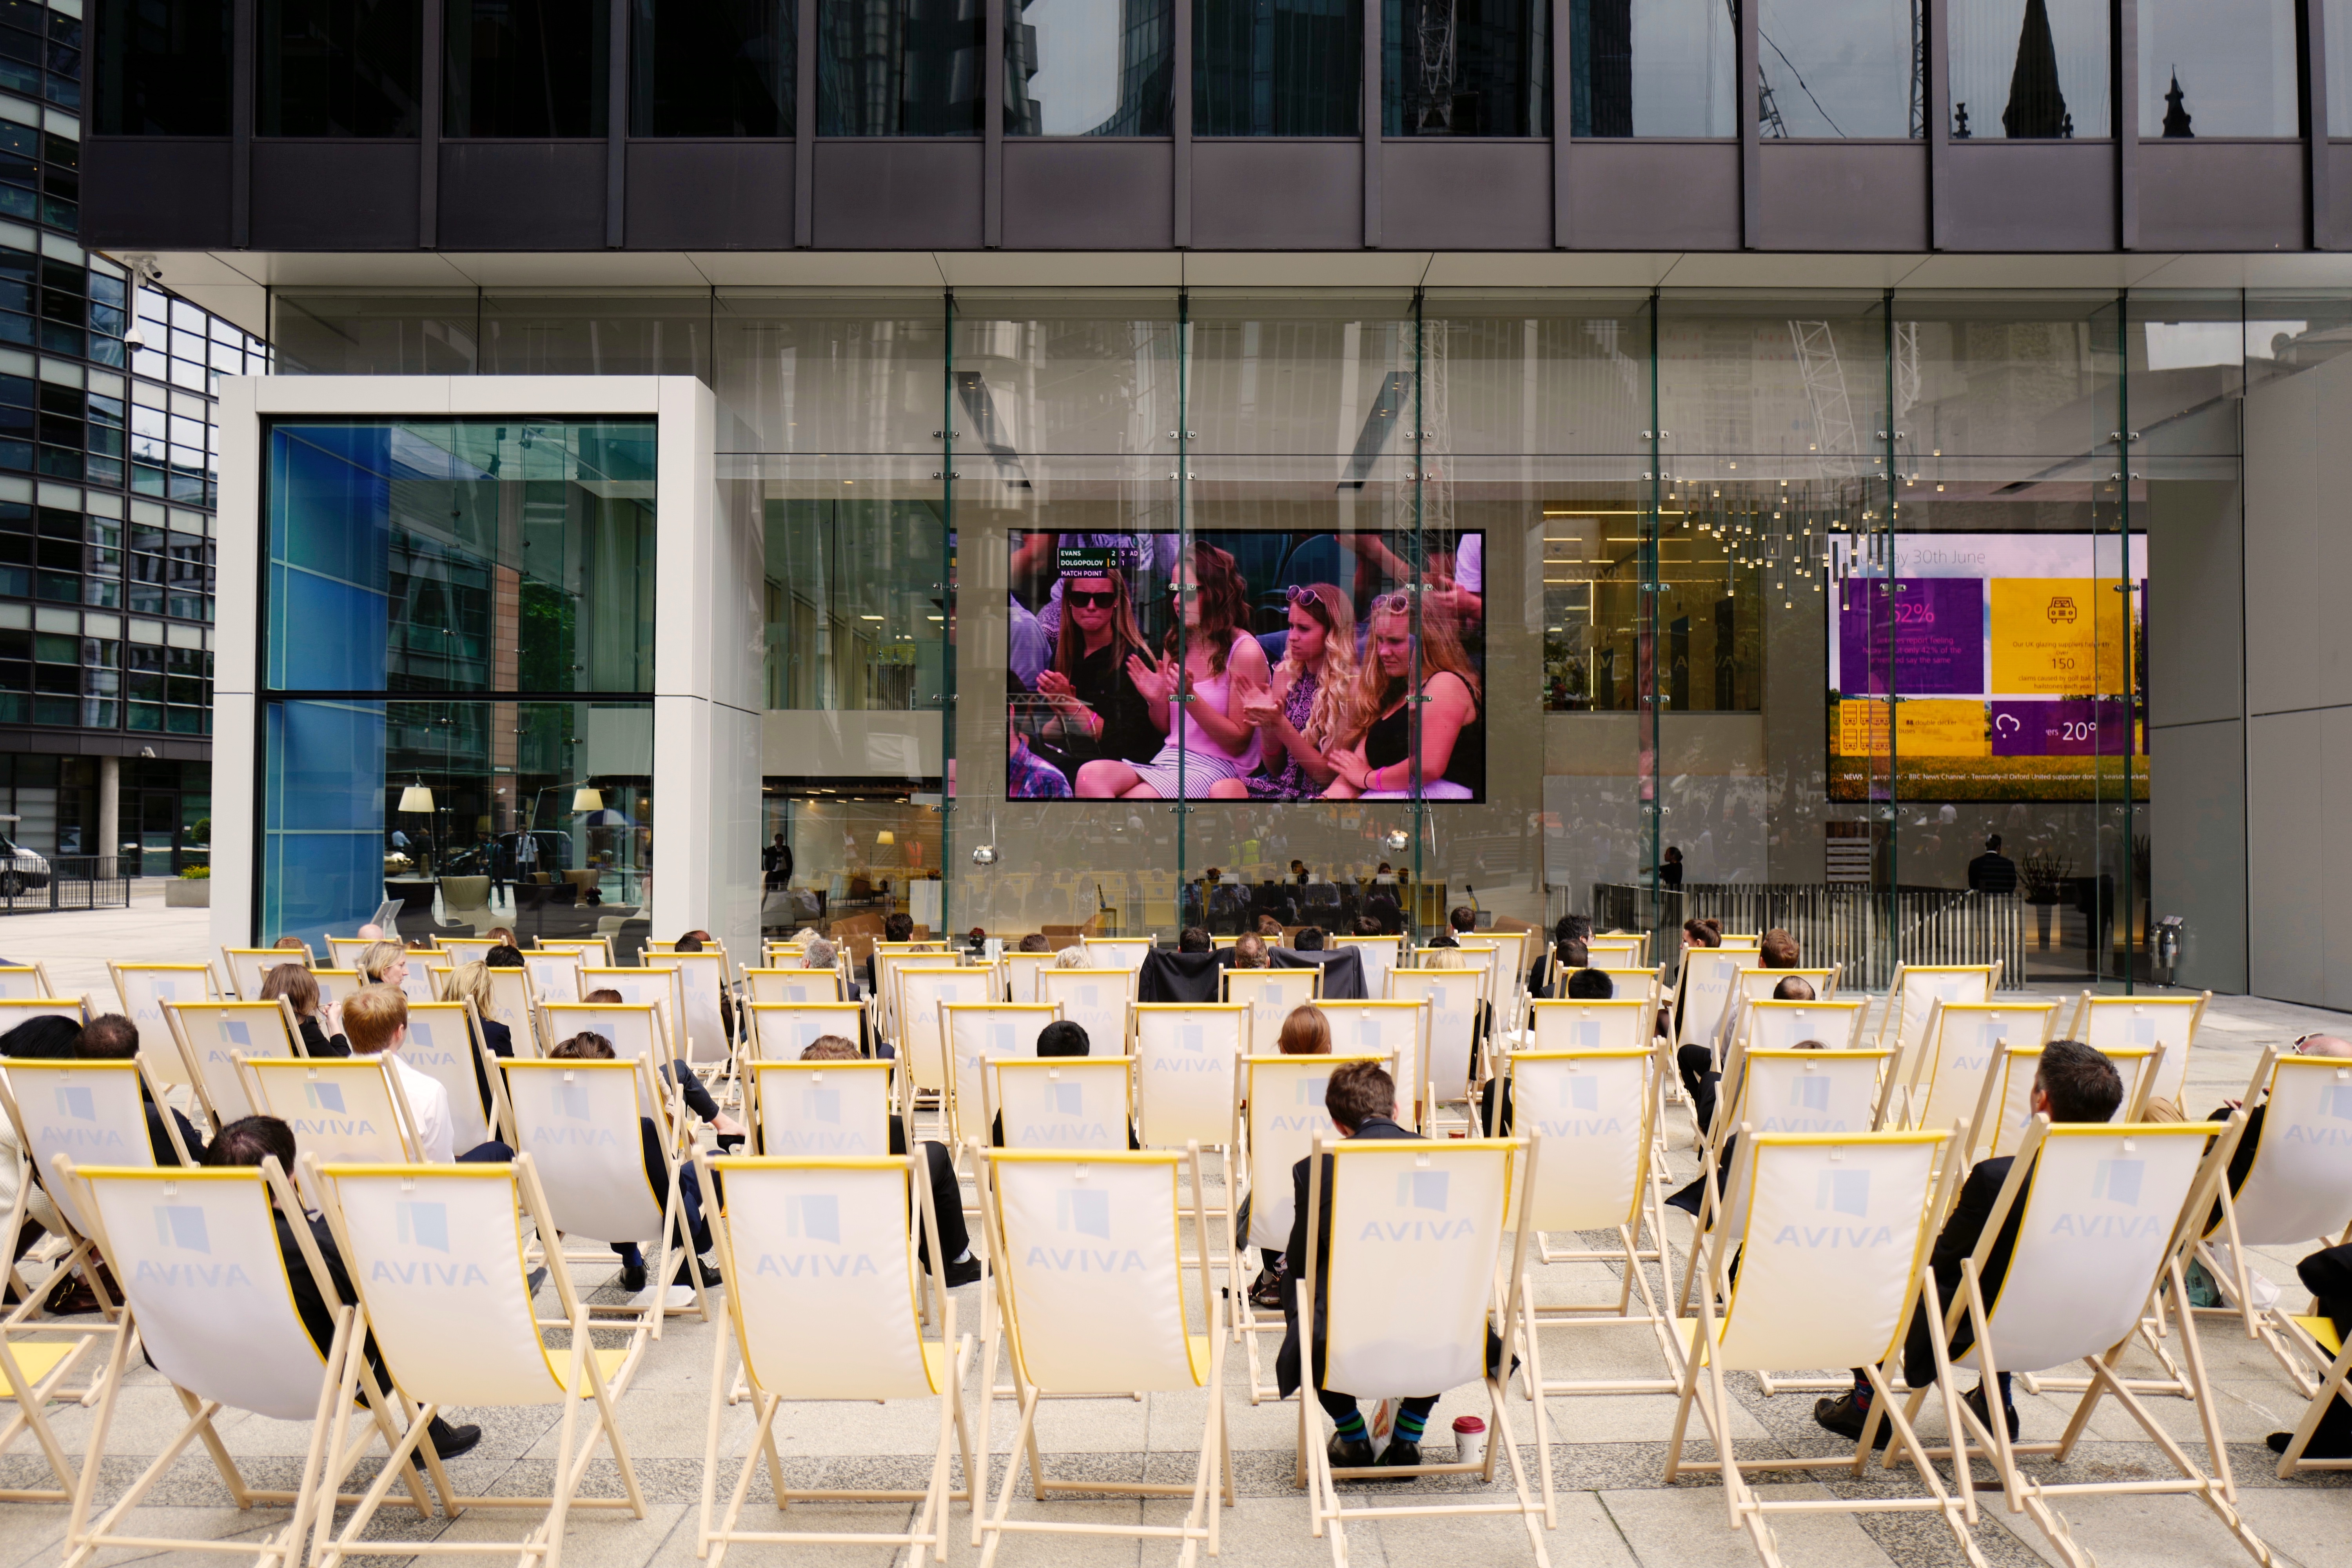 Lots of employees on Aviva branded deck chairs watching a large TV screen